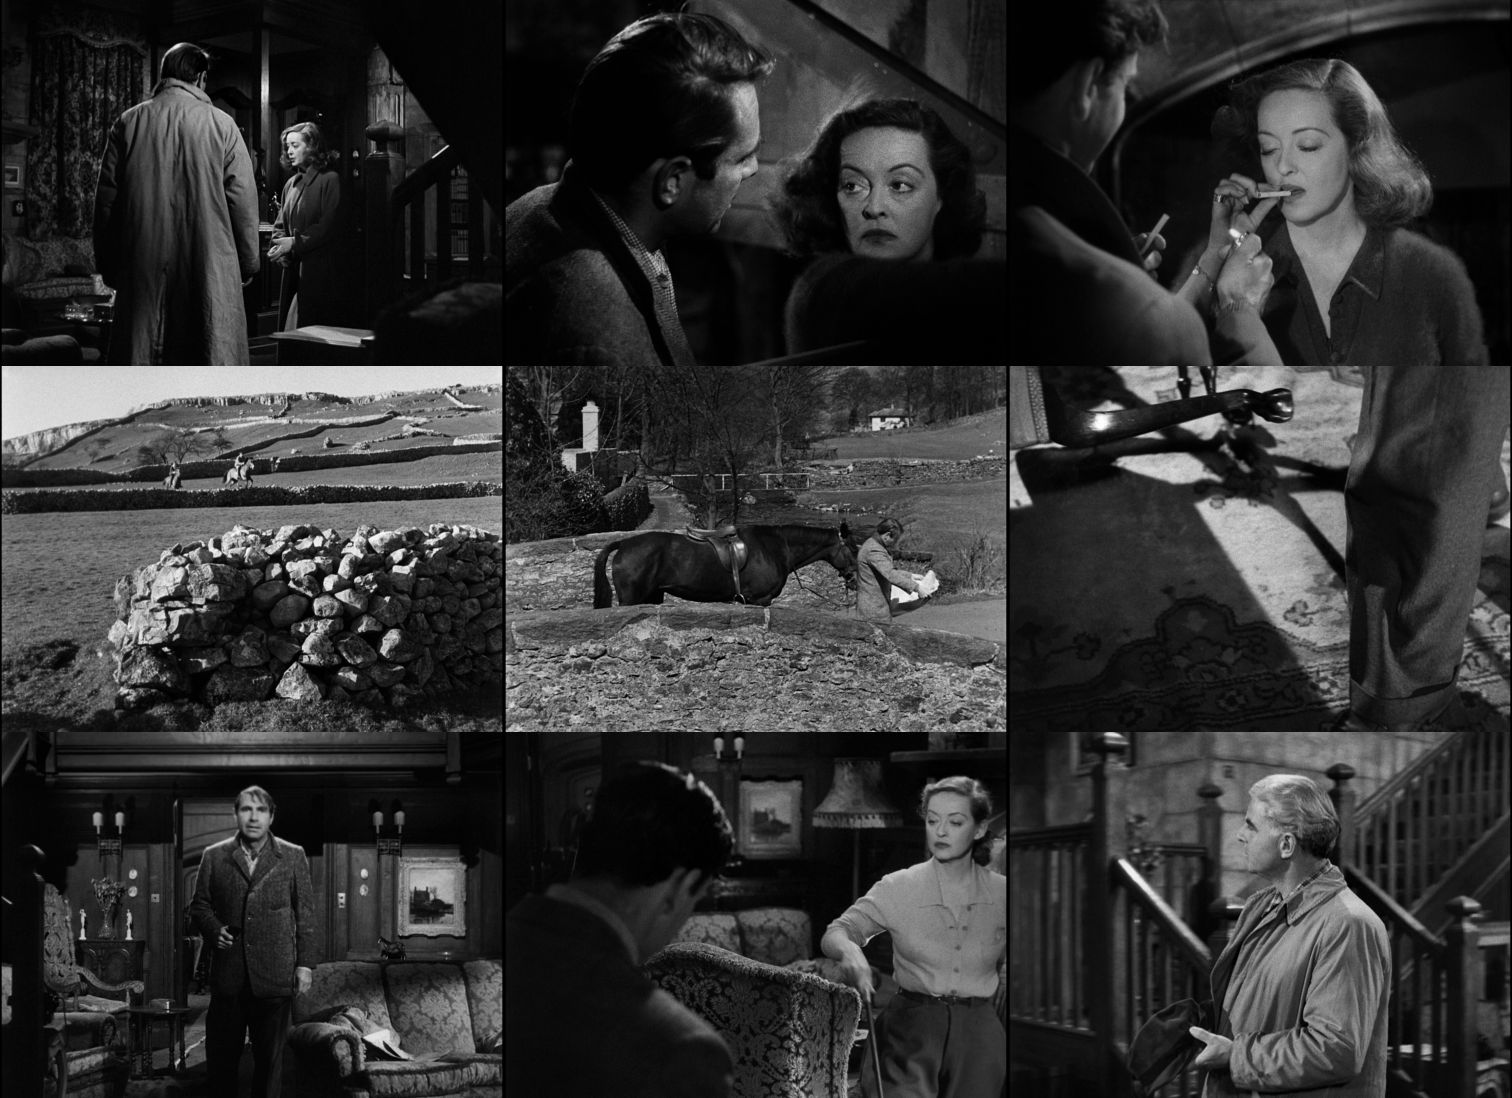  Another.Mans.Poison.1951.1080p.BluRay.x264-USURY 7.95GB-2.jpeg